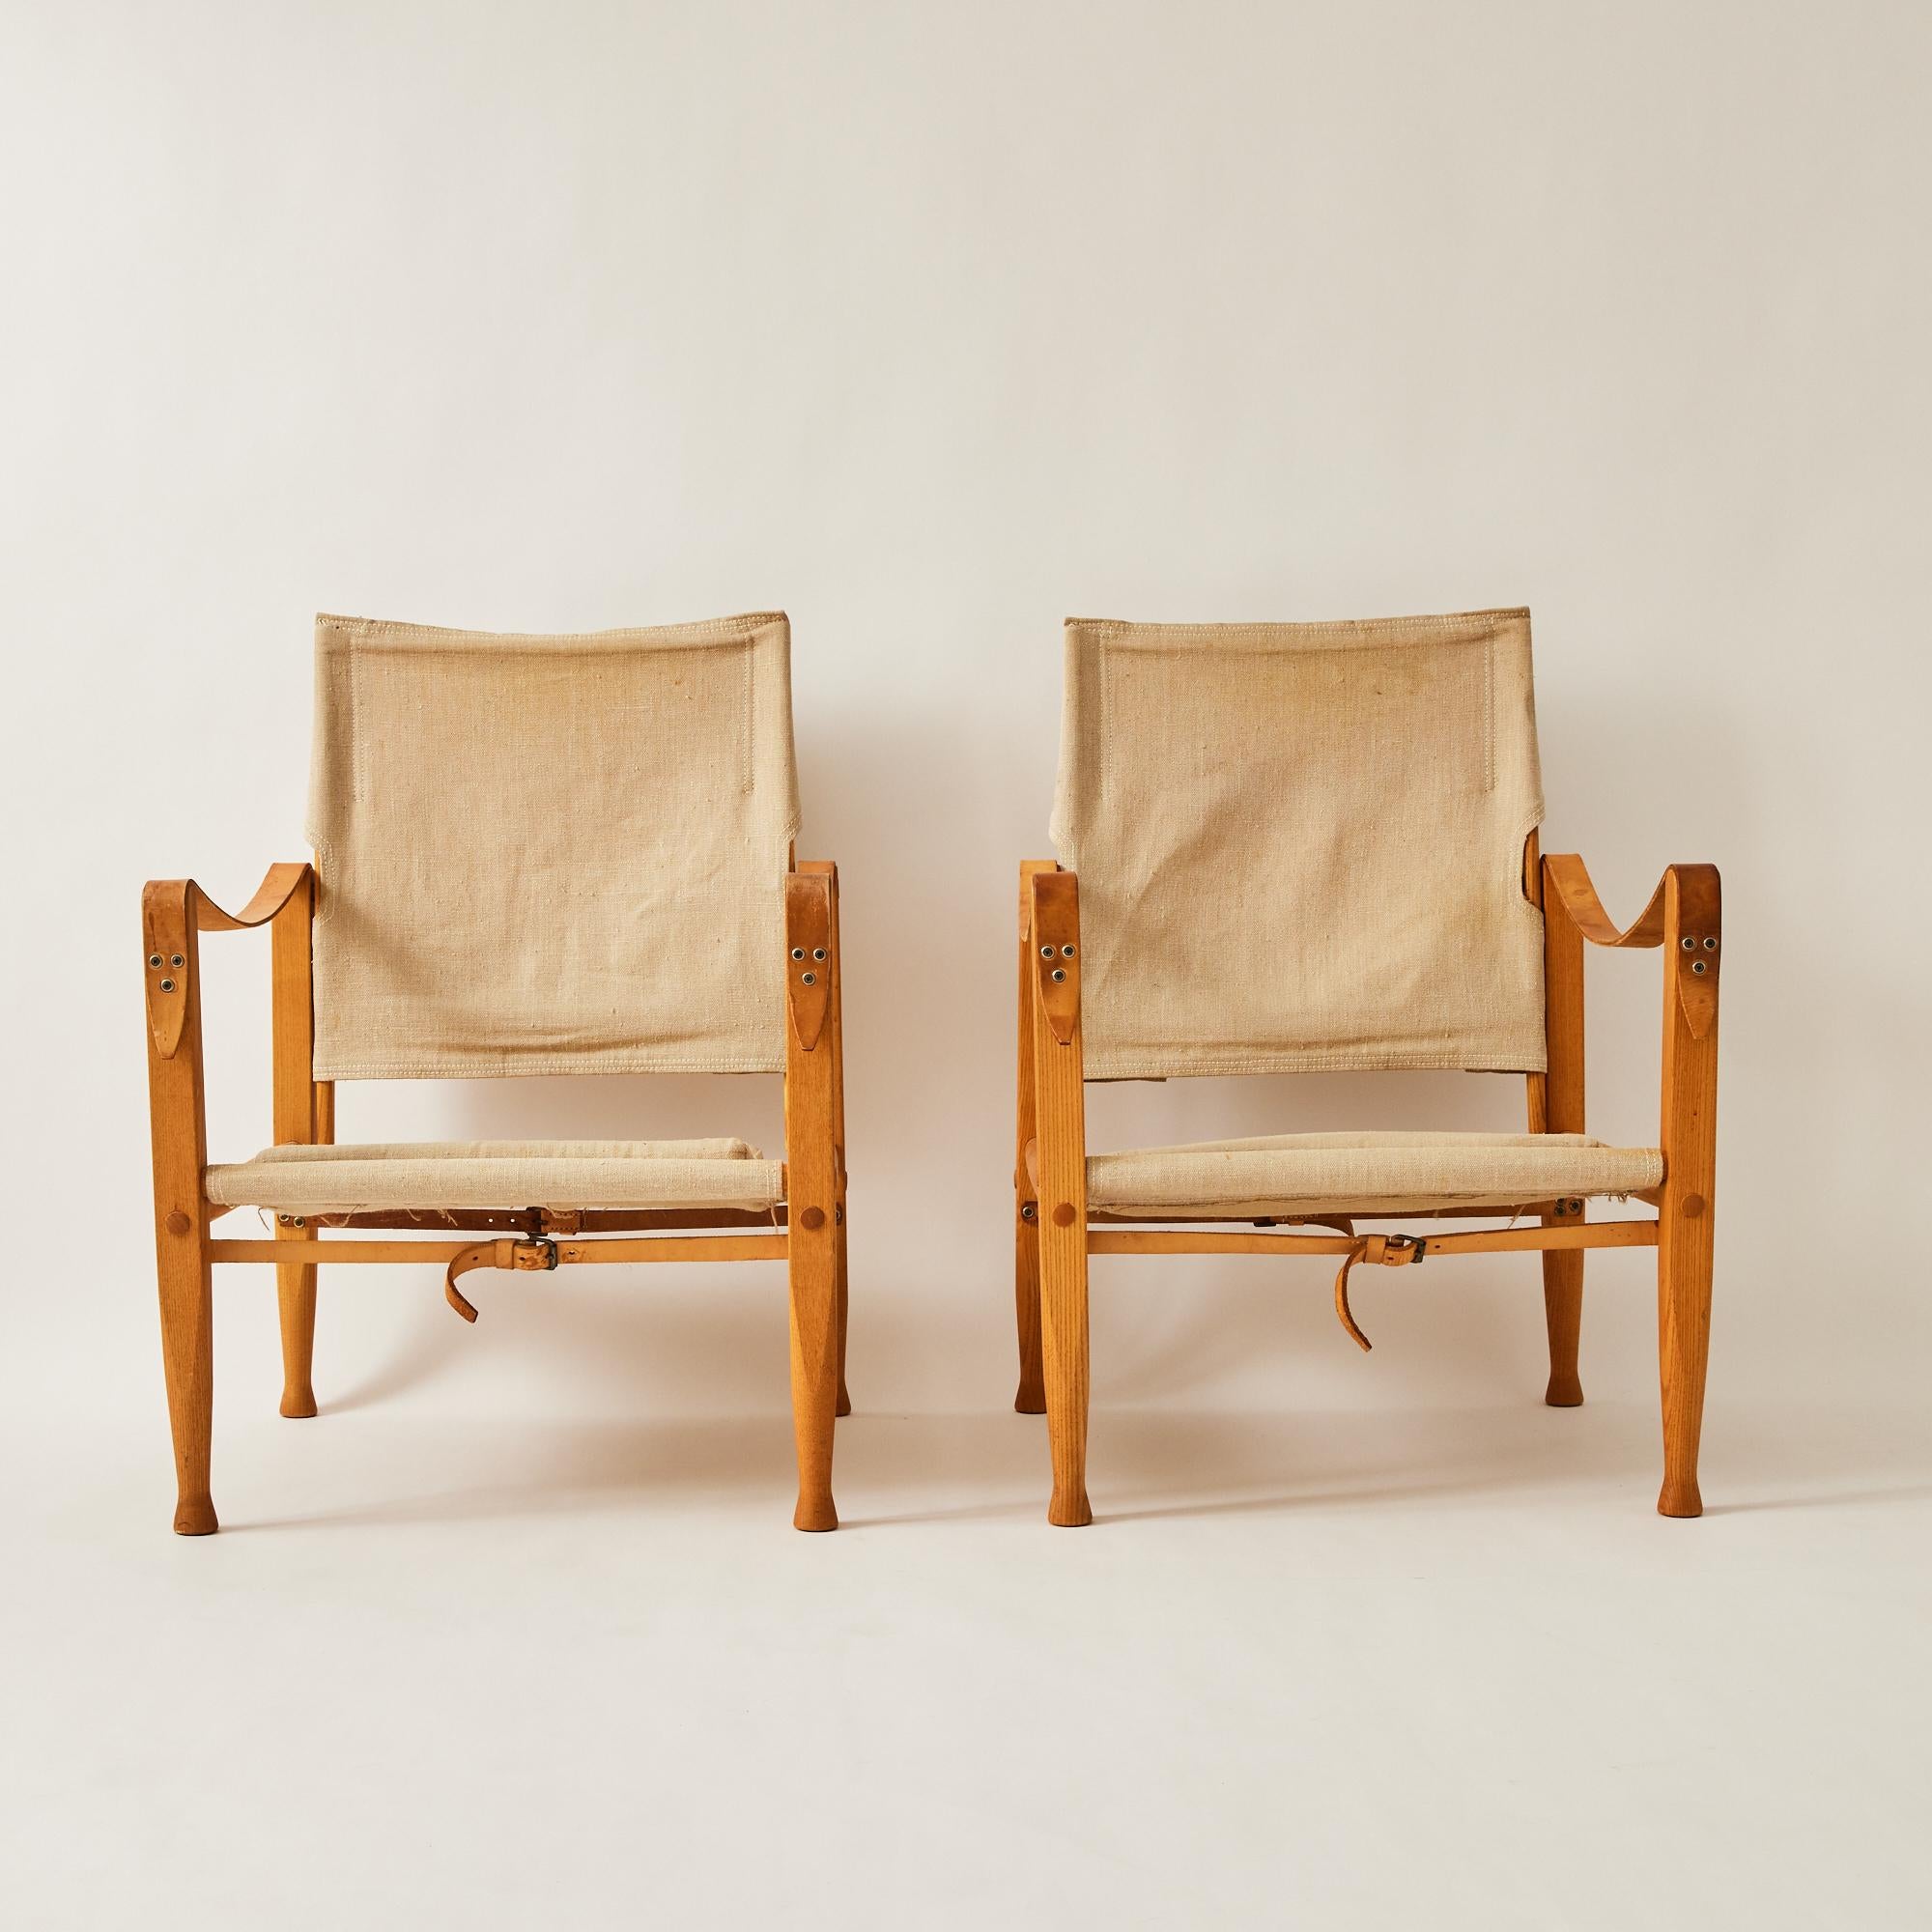 Iconic Danish Safari chairs designed by designer Kaare Klint who is known as the father of Danish modernism. They were designed in the 1930s and manufactured by Rud Rasmussen in the 1960's. Klint was inspired by images of the Roorkhee chair which